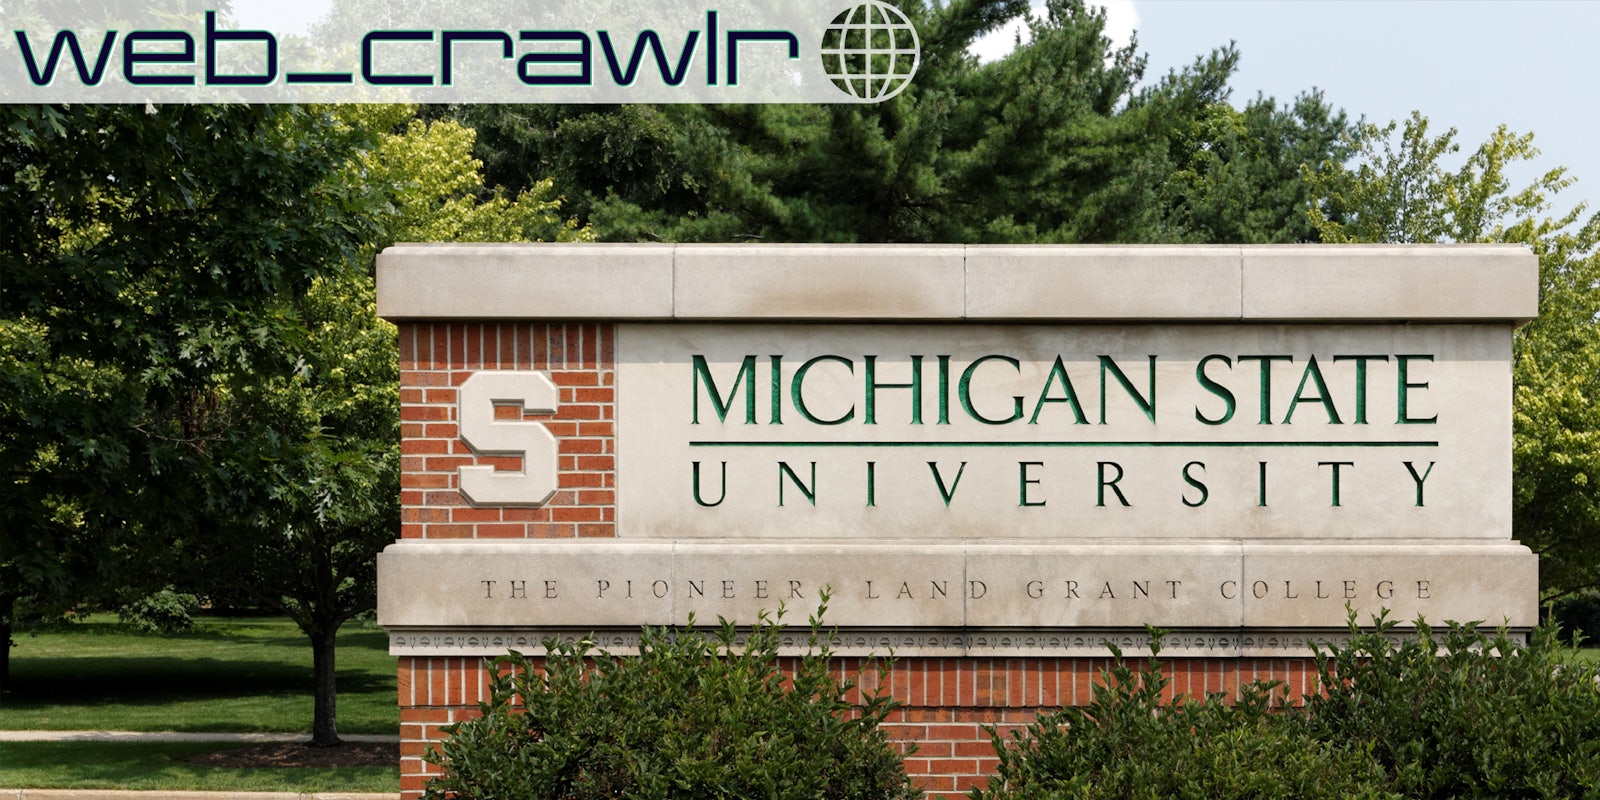 A sign for Michigan State University. The Daily Dot newsletter web_crawlr logo is in the top left corner.